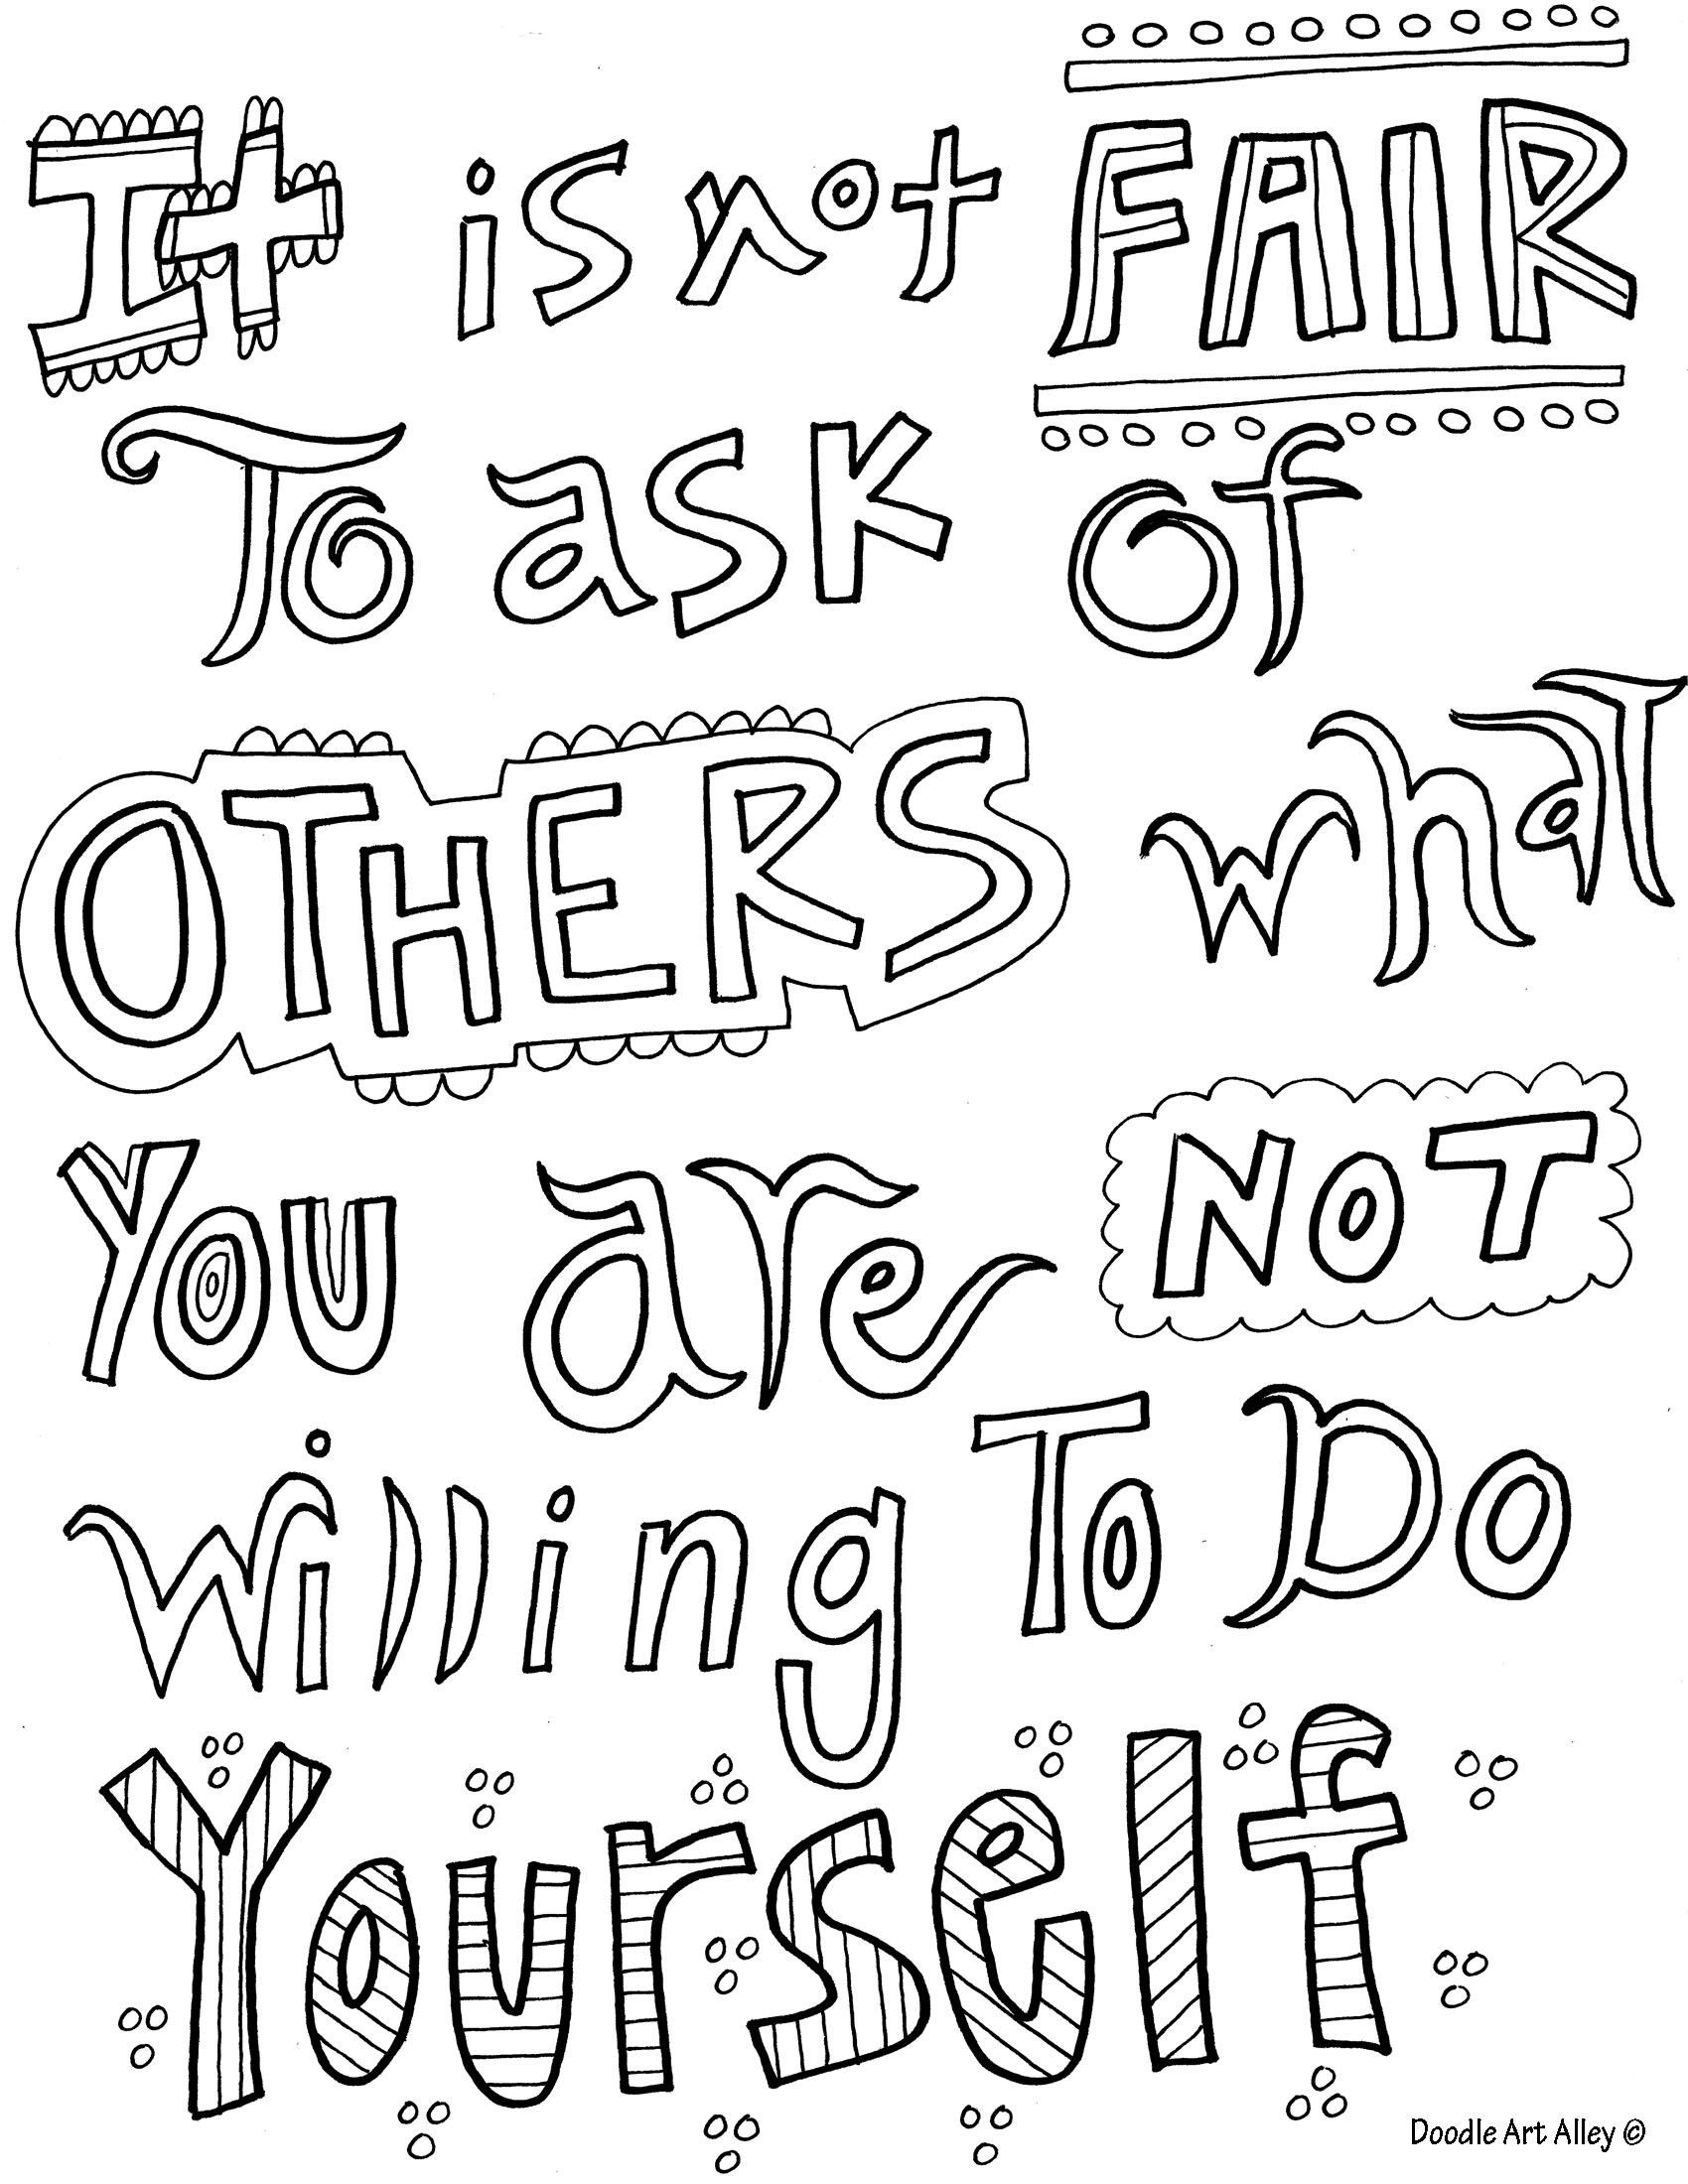 Quote Coloring Pages For Kids
 Inspirational Quotes Coloring Pages QuotesGram